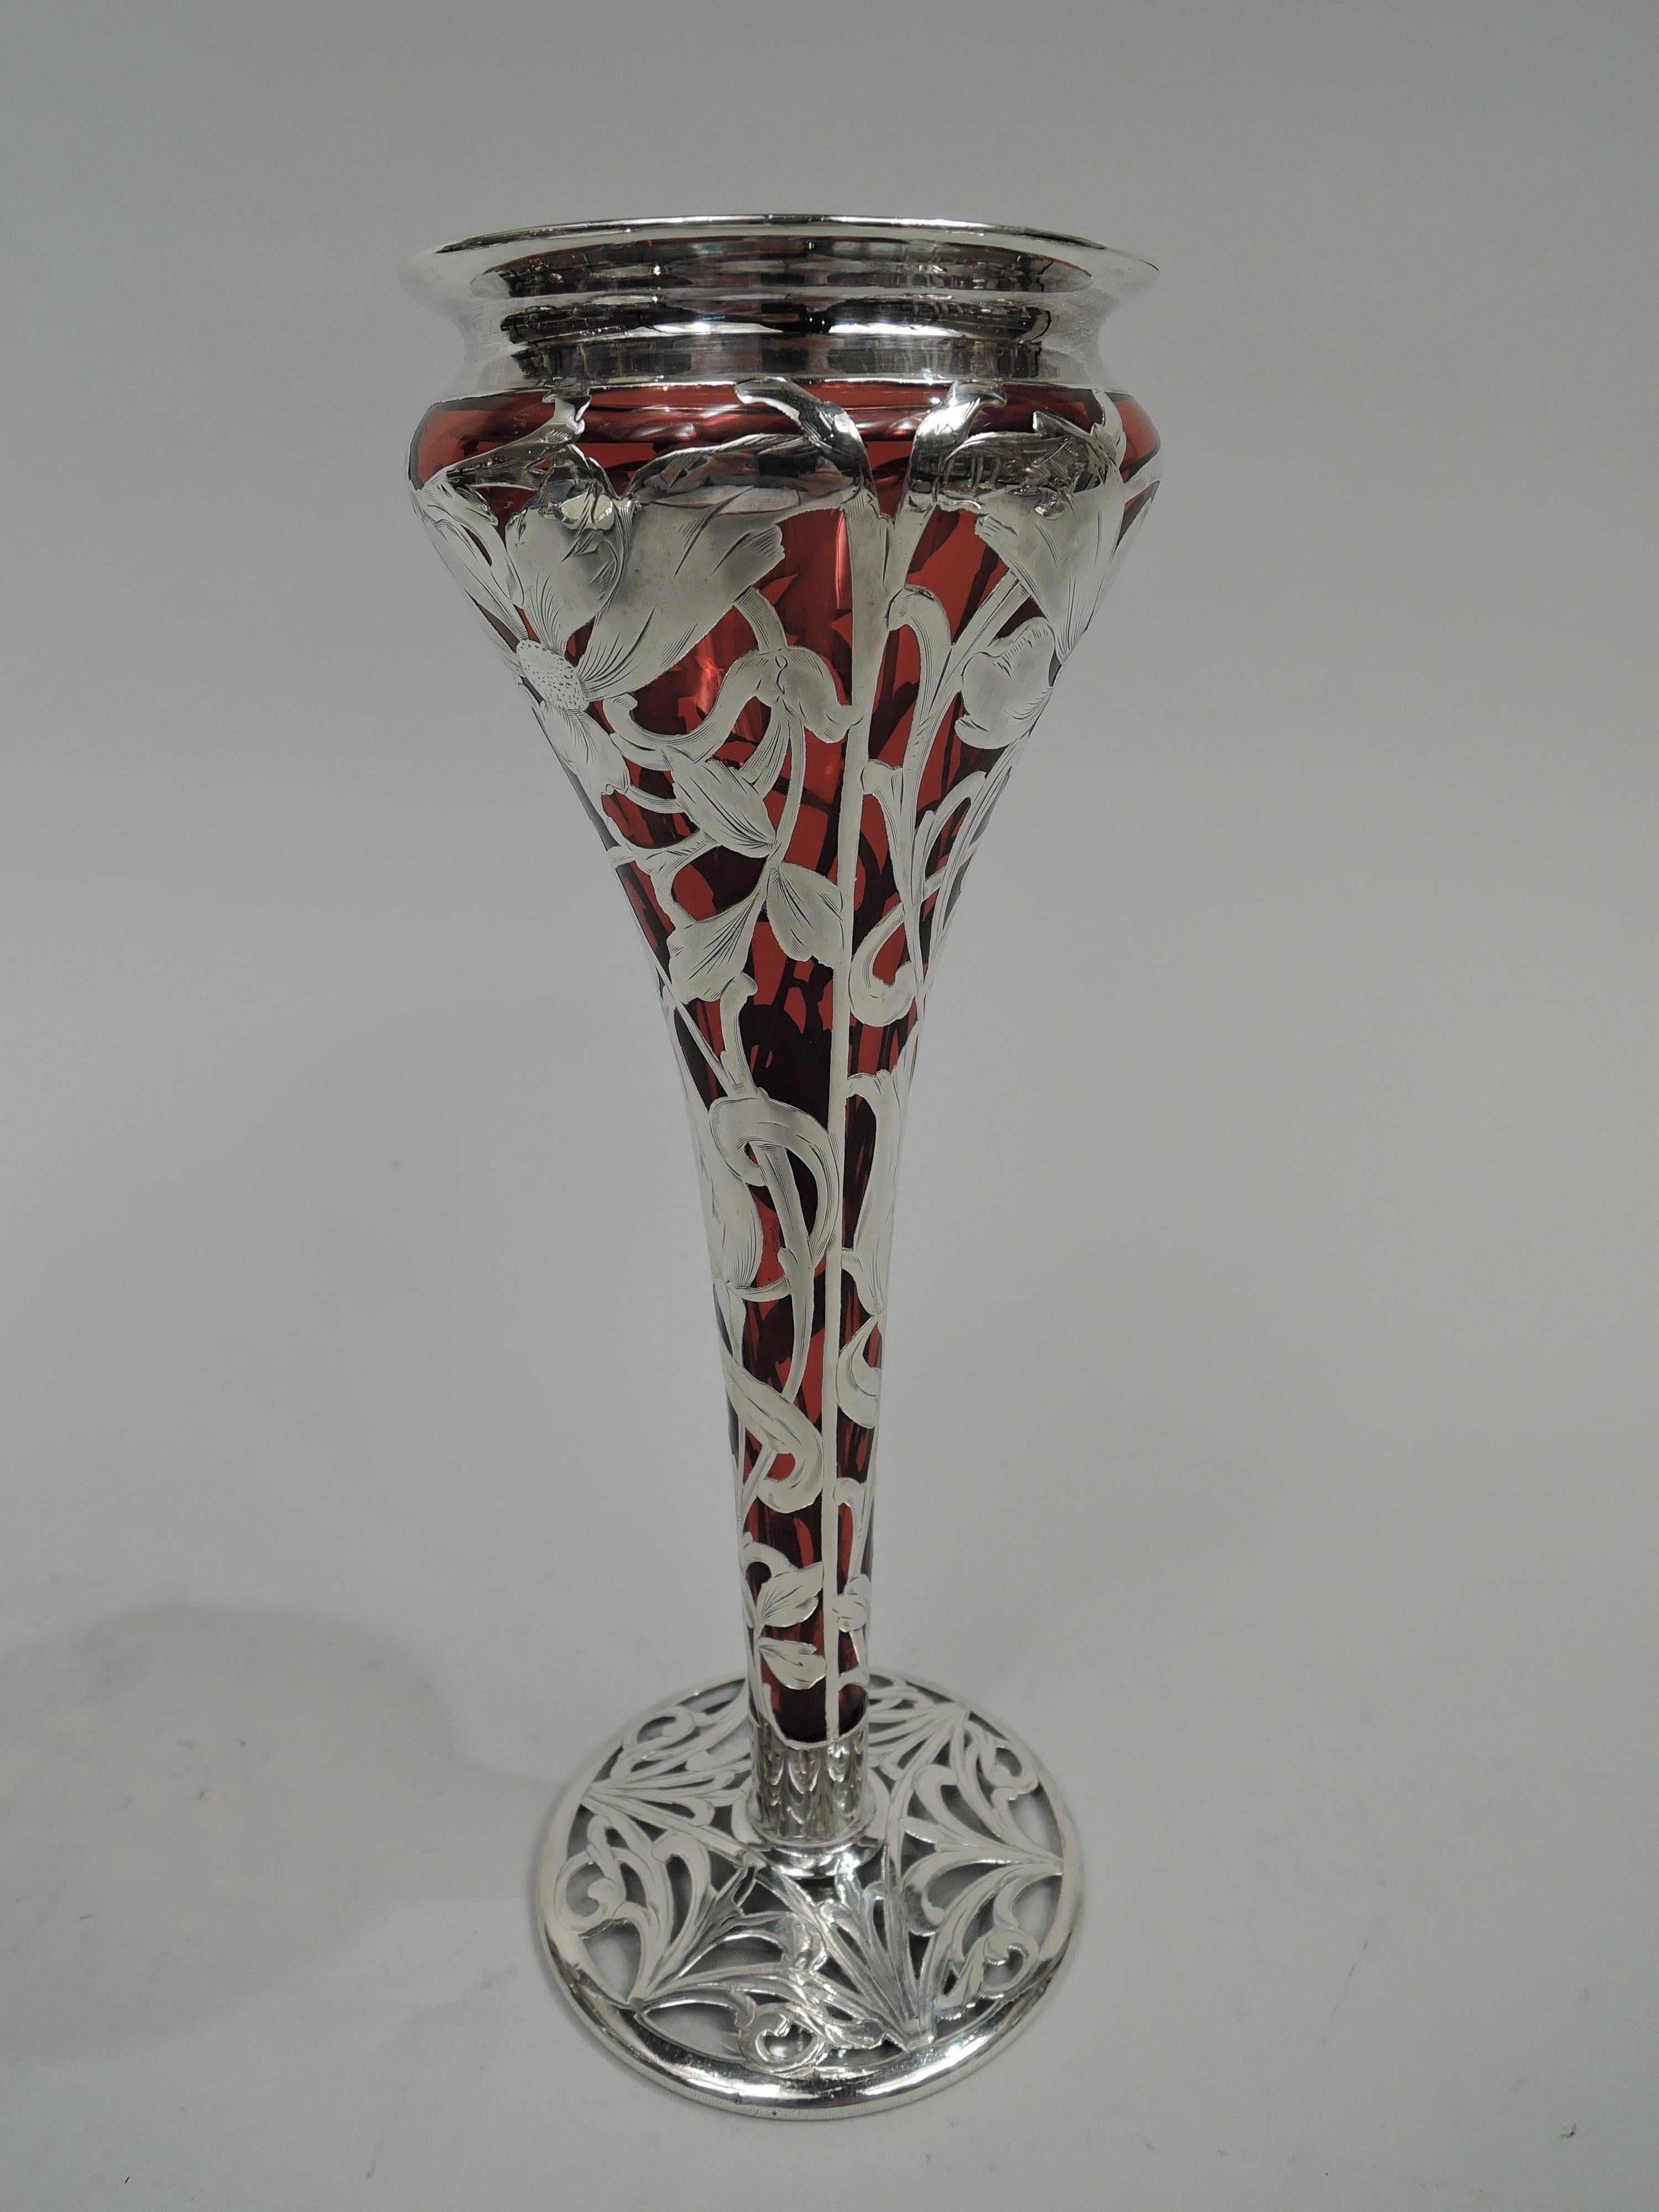 Turn-of-the-century Art Nouveau glass vase with engraved silver overlay. Conical with flared rim and gently raised round foot. Overlay in form of loose and distended flower heads on scrolling and entwined stems; on foot dense tendril pattern. Body